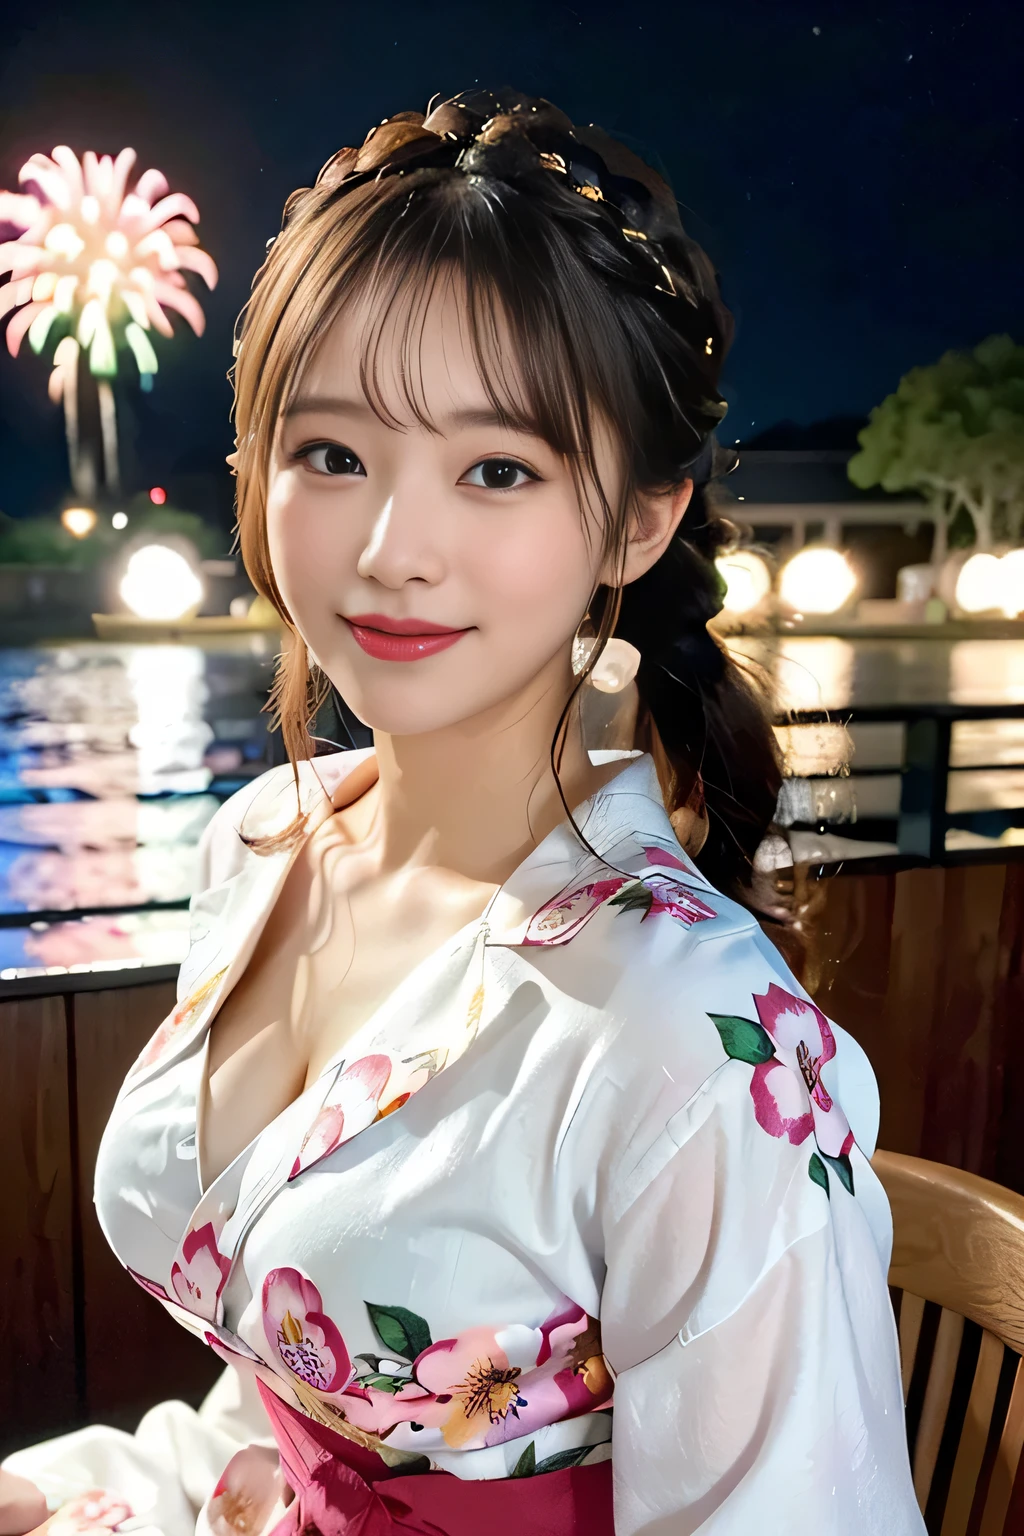 (beautiful mature adult woman),(flower hair ornament,floral braided top knot,twisted side part ponytail,floral braided headband,half up、floral braided space buns,voluminous fishtail braid,Twisted pan,),(The bangs are see-through bangs),very delicate and beautiful hair,(((emphasize the chest:1.3))),(dynamic angle),(dynamic and sexy pose),laughter、Looking back wearing a floral yukata isolated on white background、Fireworks being launched into the sky against the backdrop of the riverbank at night.、cute round face,big breasts,(table top,highest quality,Ultra high resolution output image,) ,(8K quality,),(sea art 2 mode.1),(Image mode Ultra HD,)